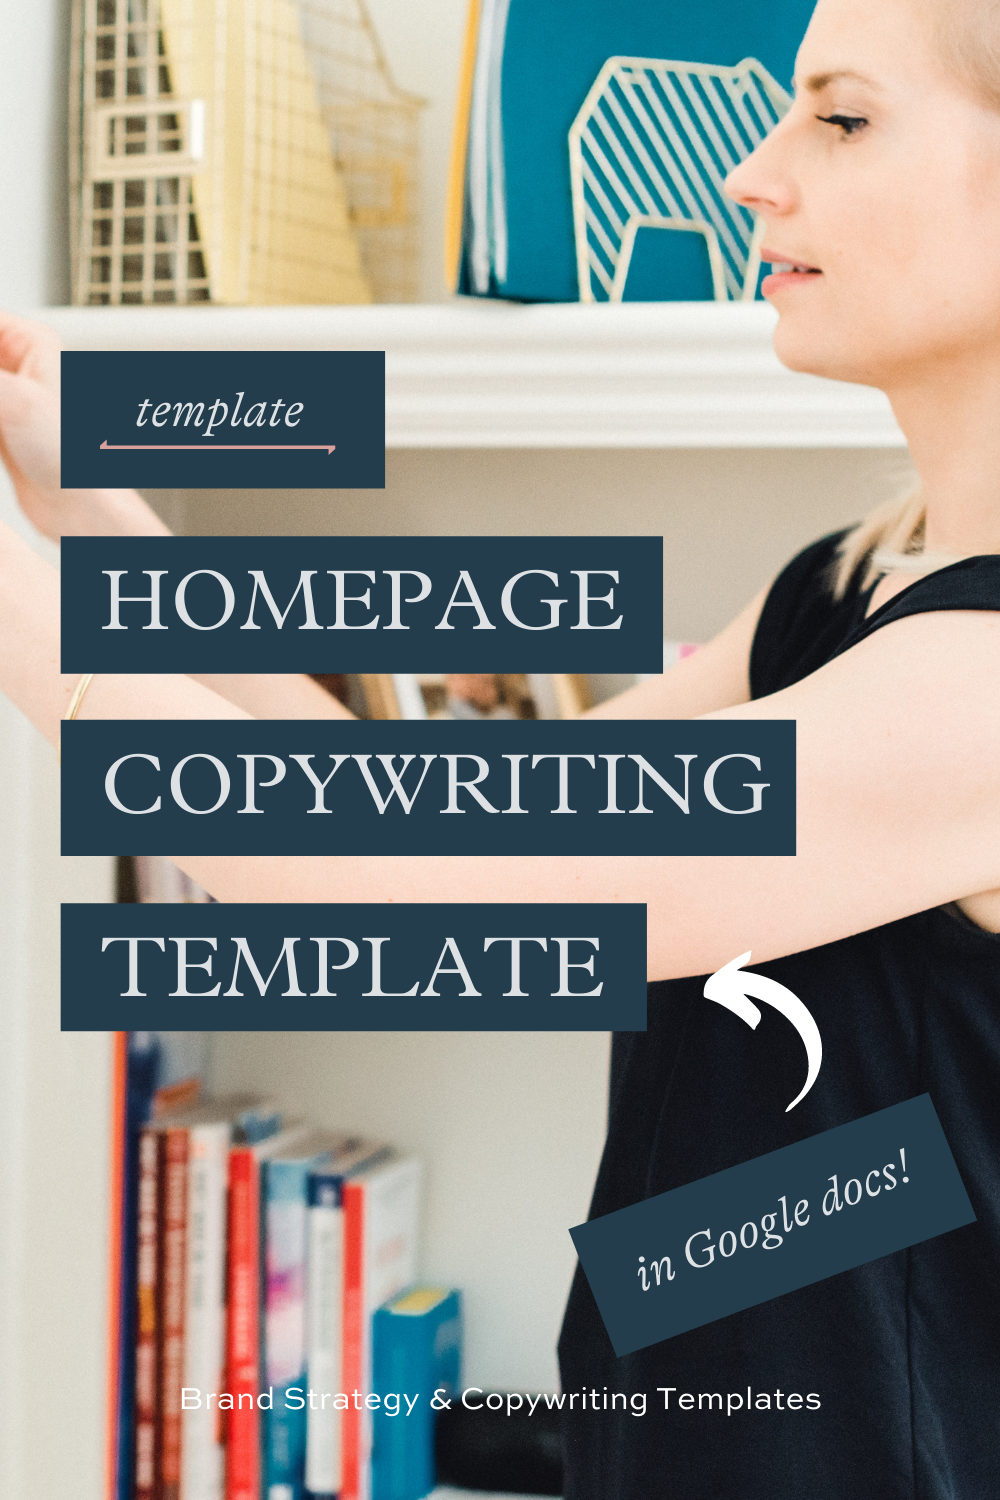 homepage-copy-template-free-download-how-to.png